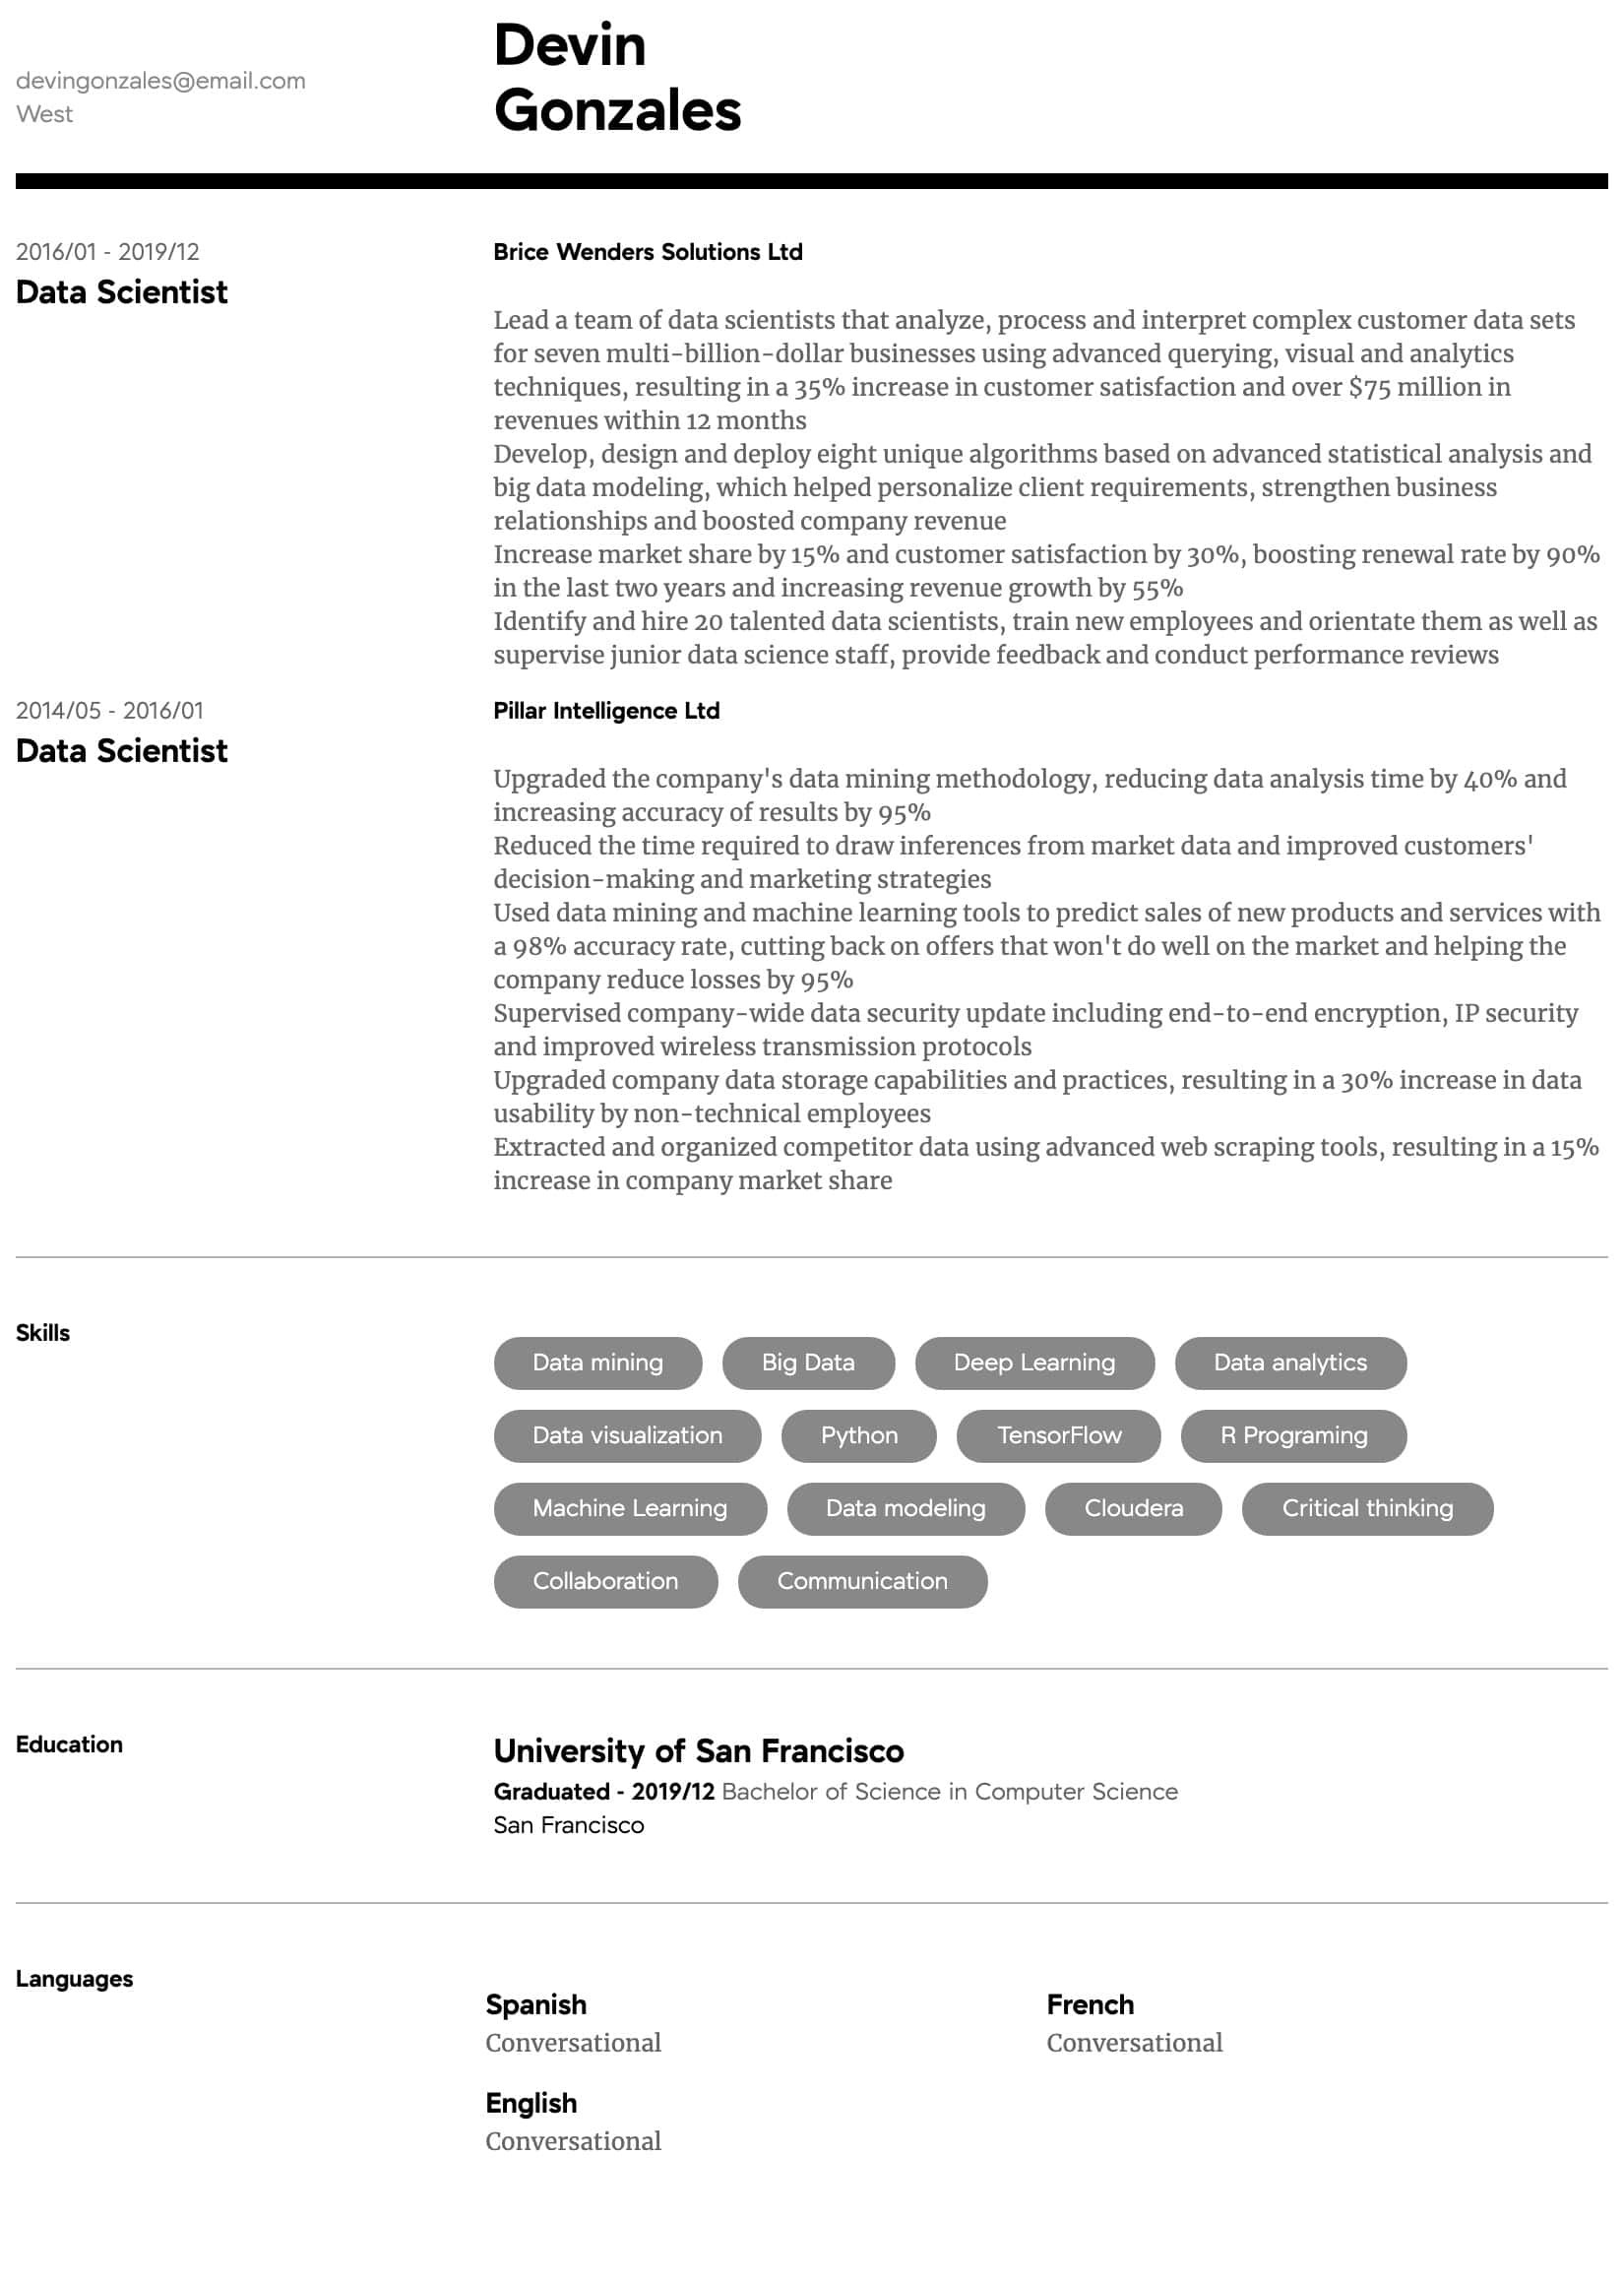 Data Scientist Resume Template Free Download Data Scientist Resume Samples All Experience Levels Resume.com …